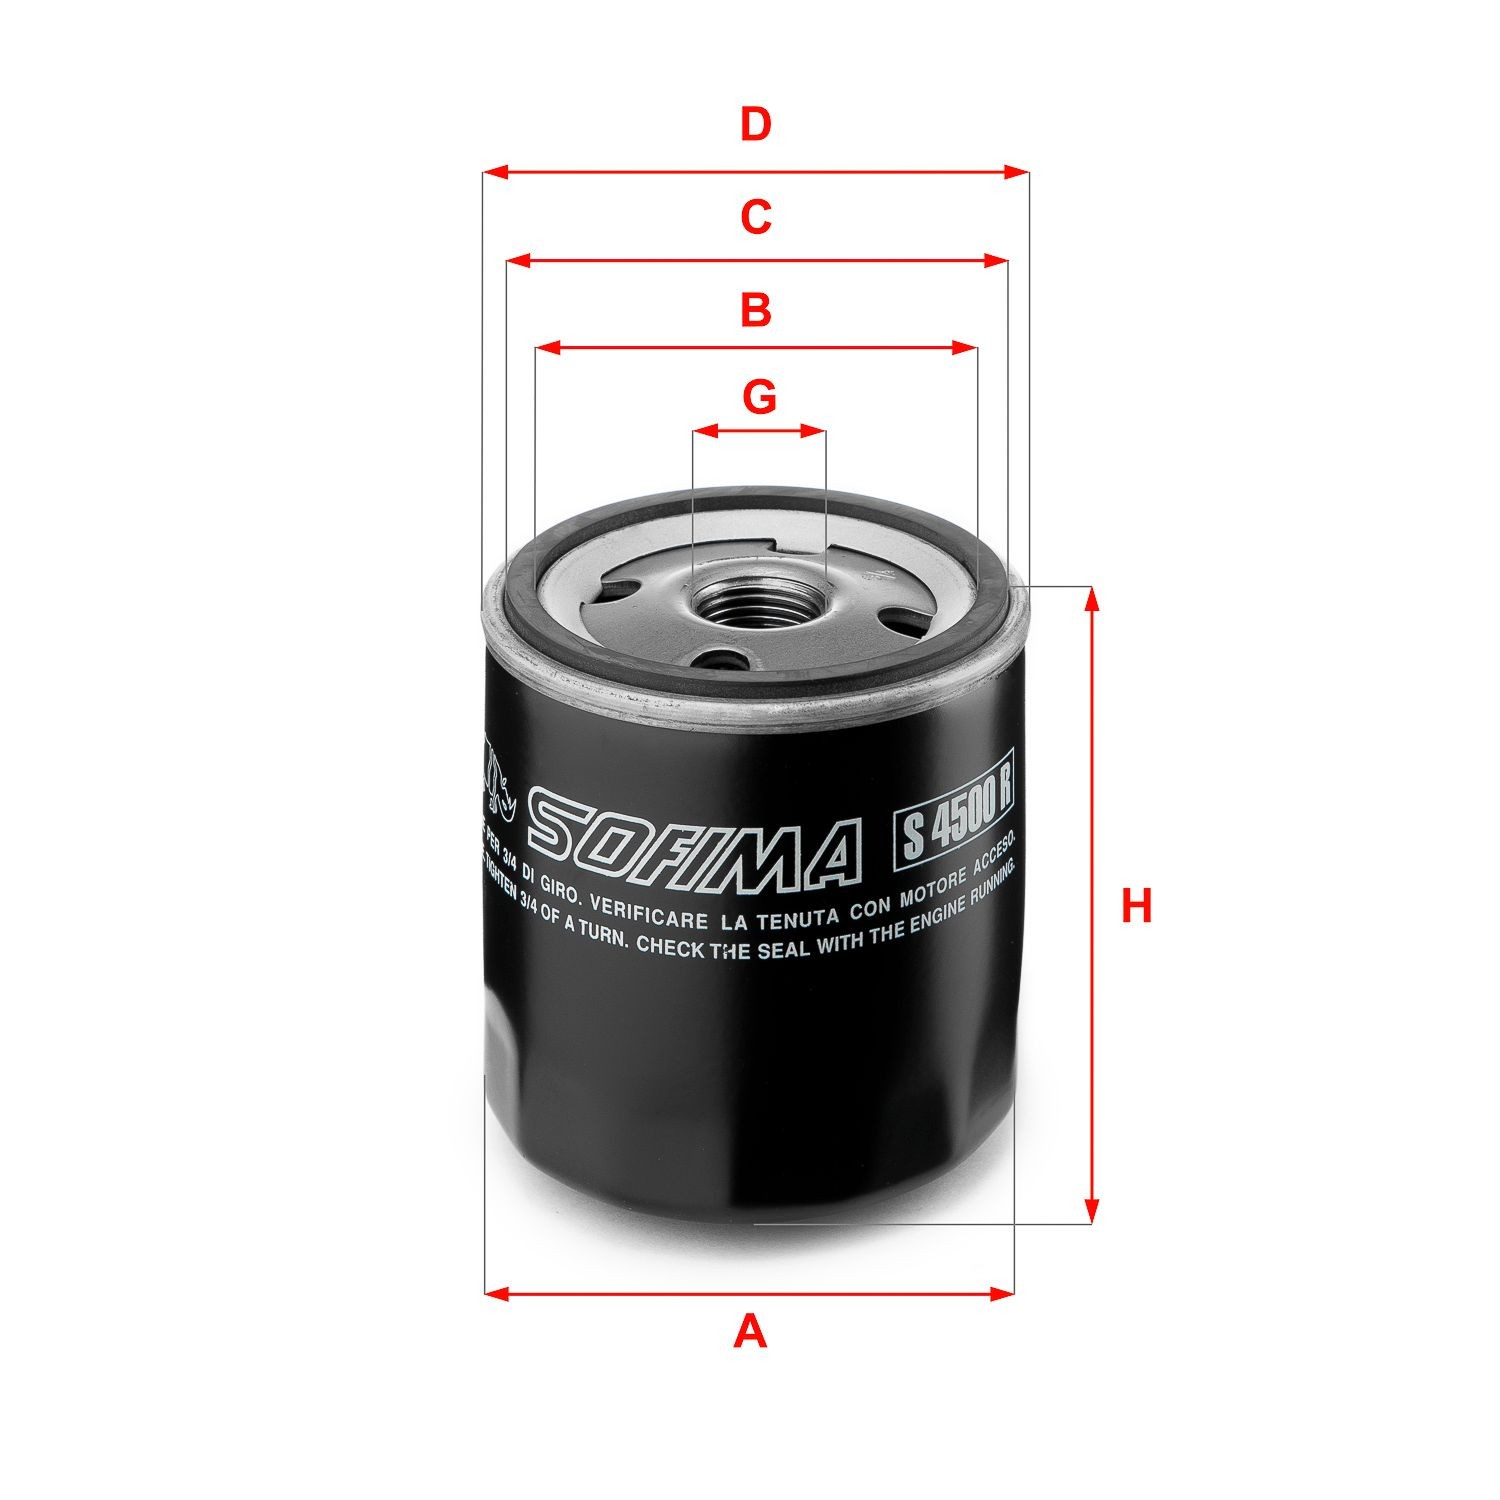 SOFIMA S 4500 R Oil filter 3/4-16 UNF, Spin-on Filter